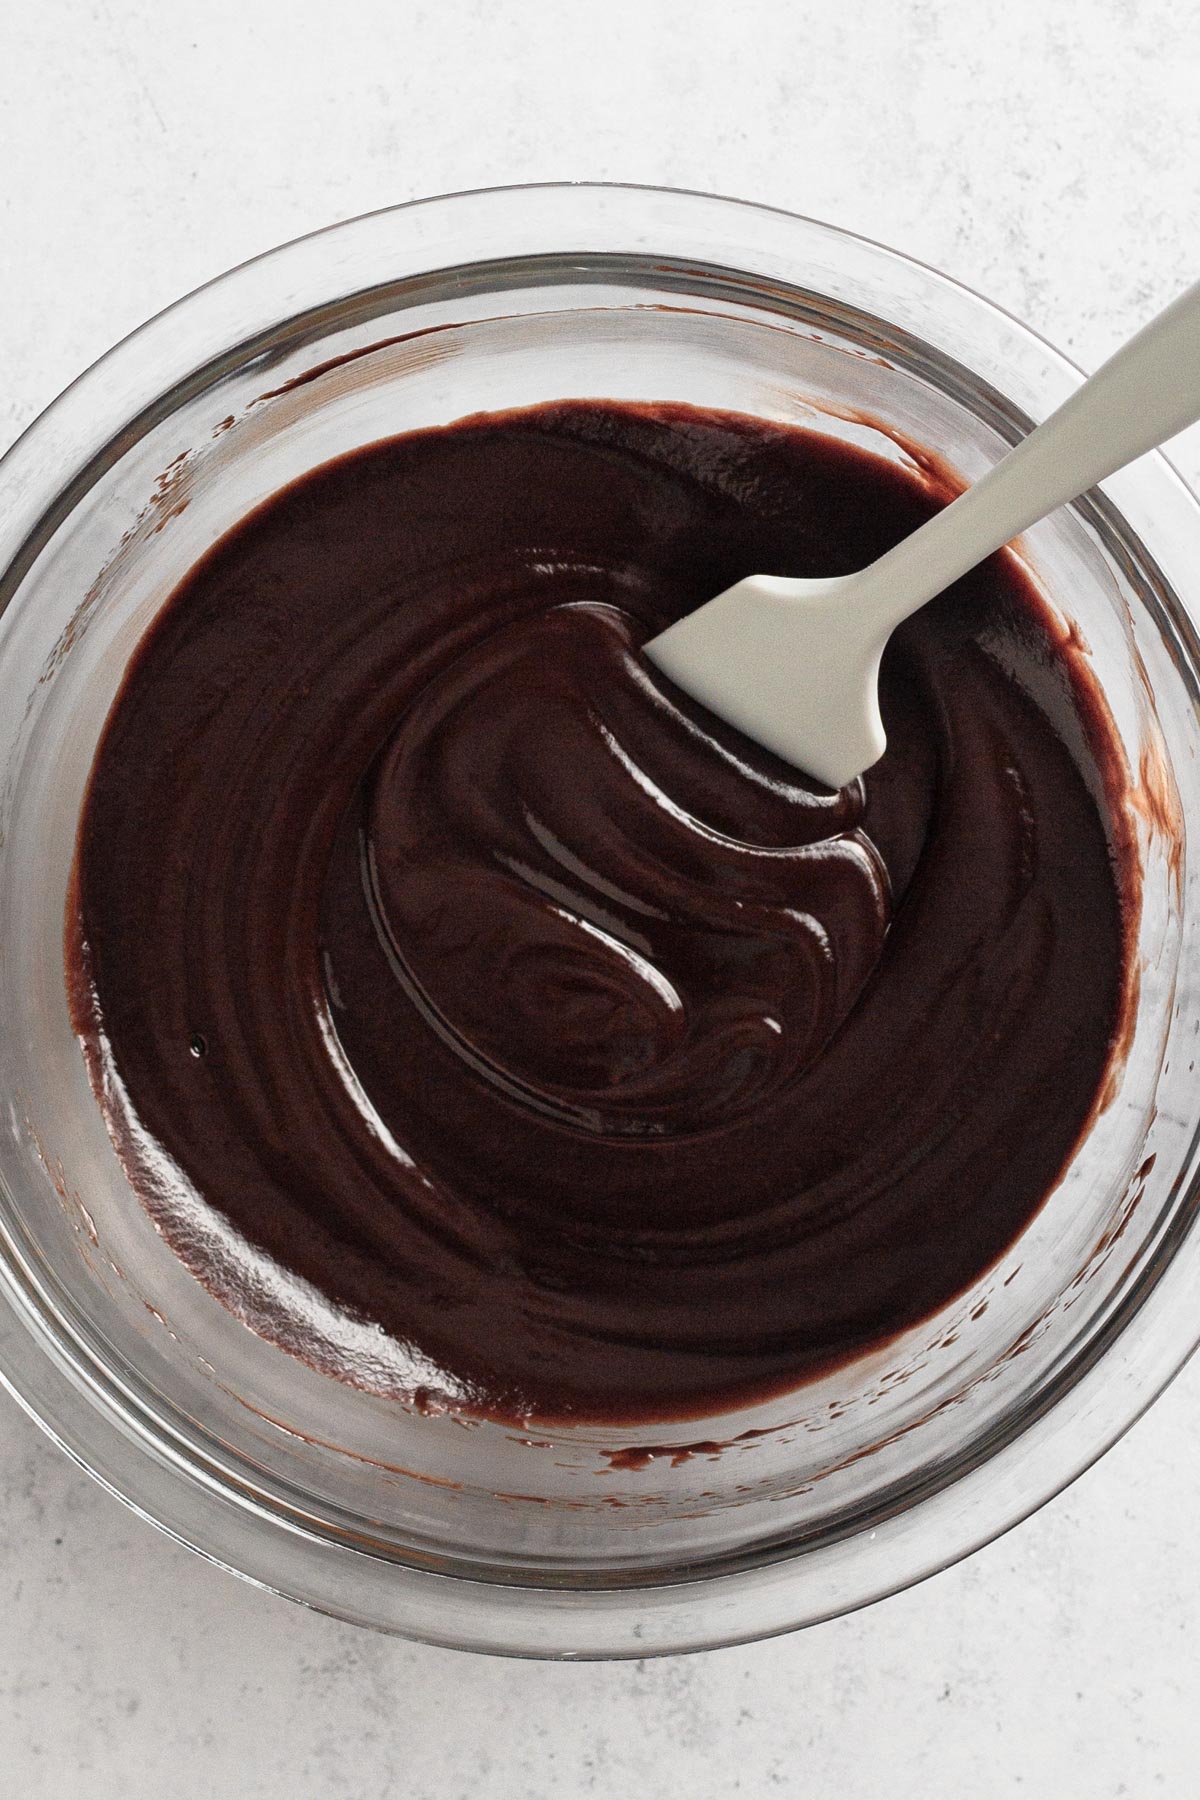 Overhead view of chocolate ganache in a glass mixing bowl with a white rubber spatula.